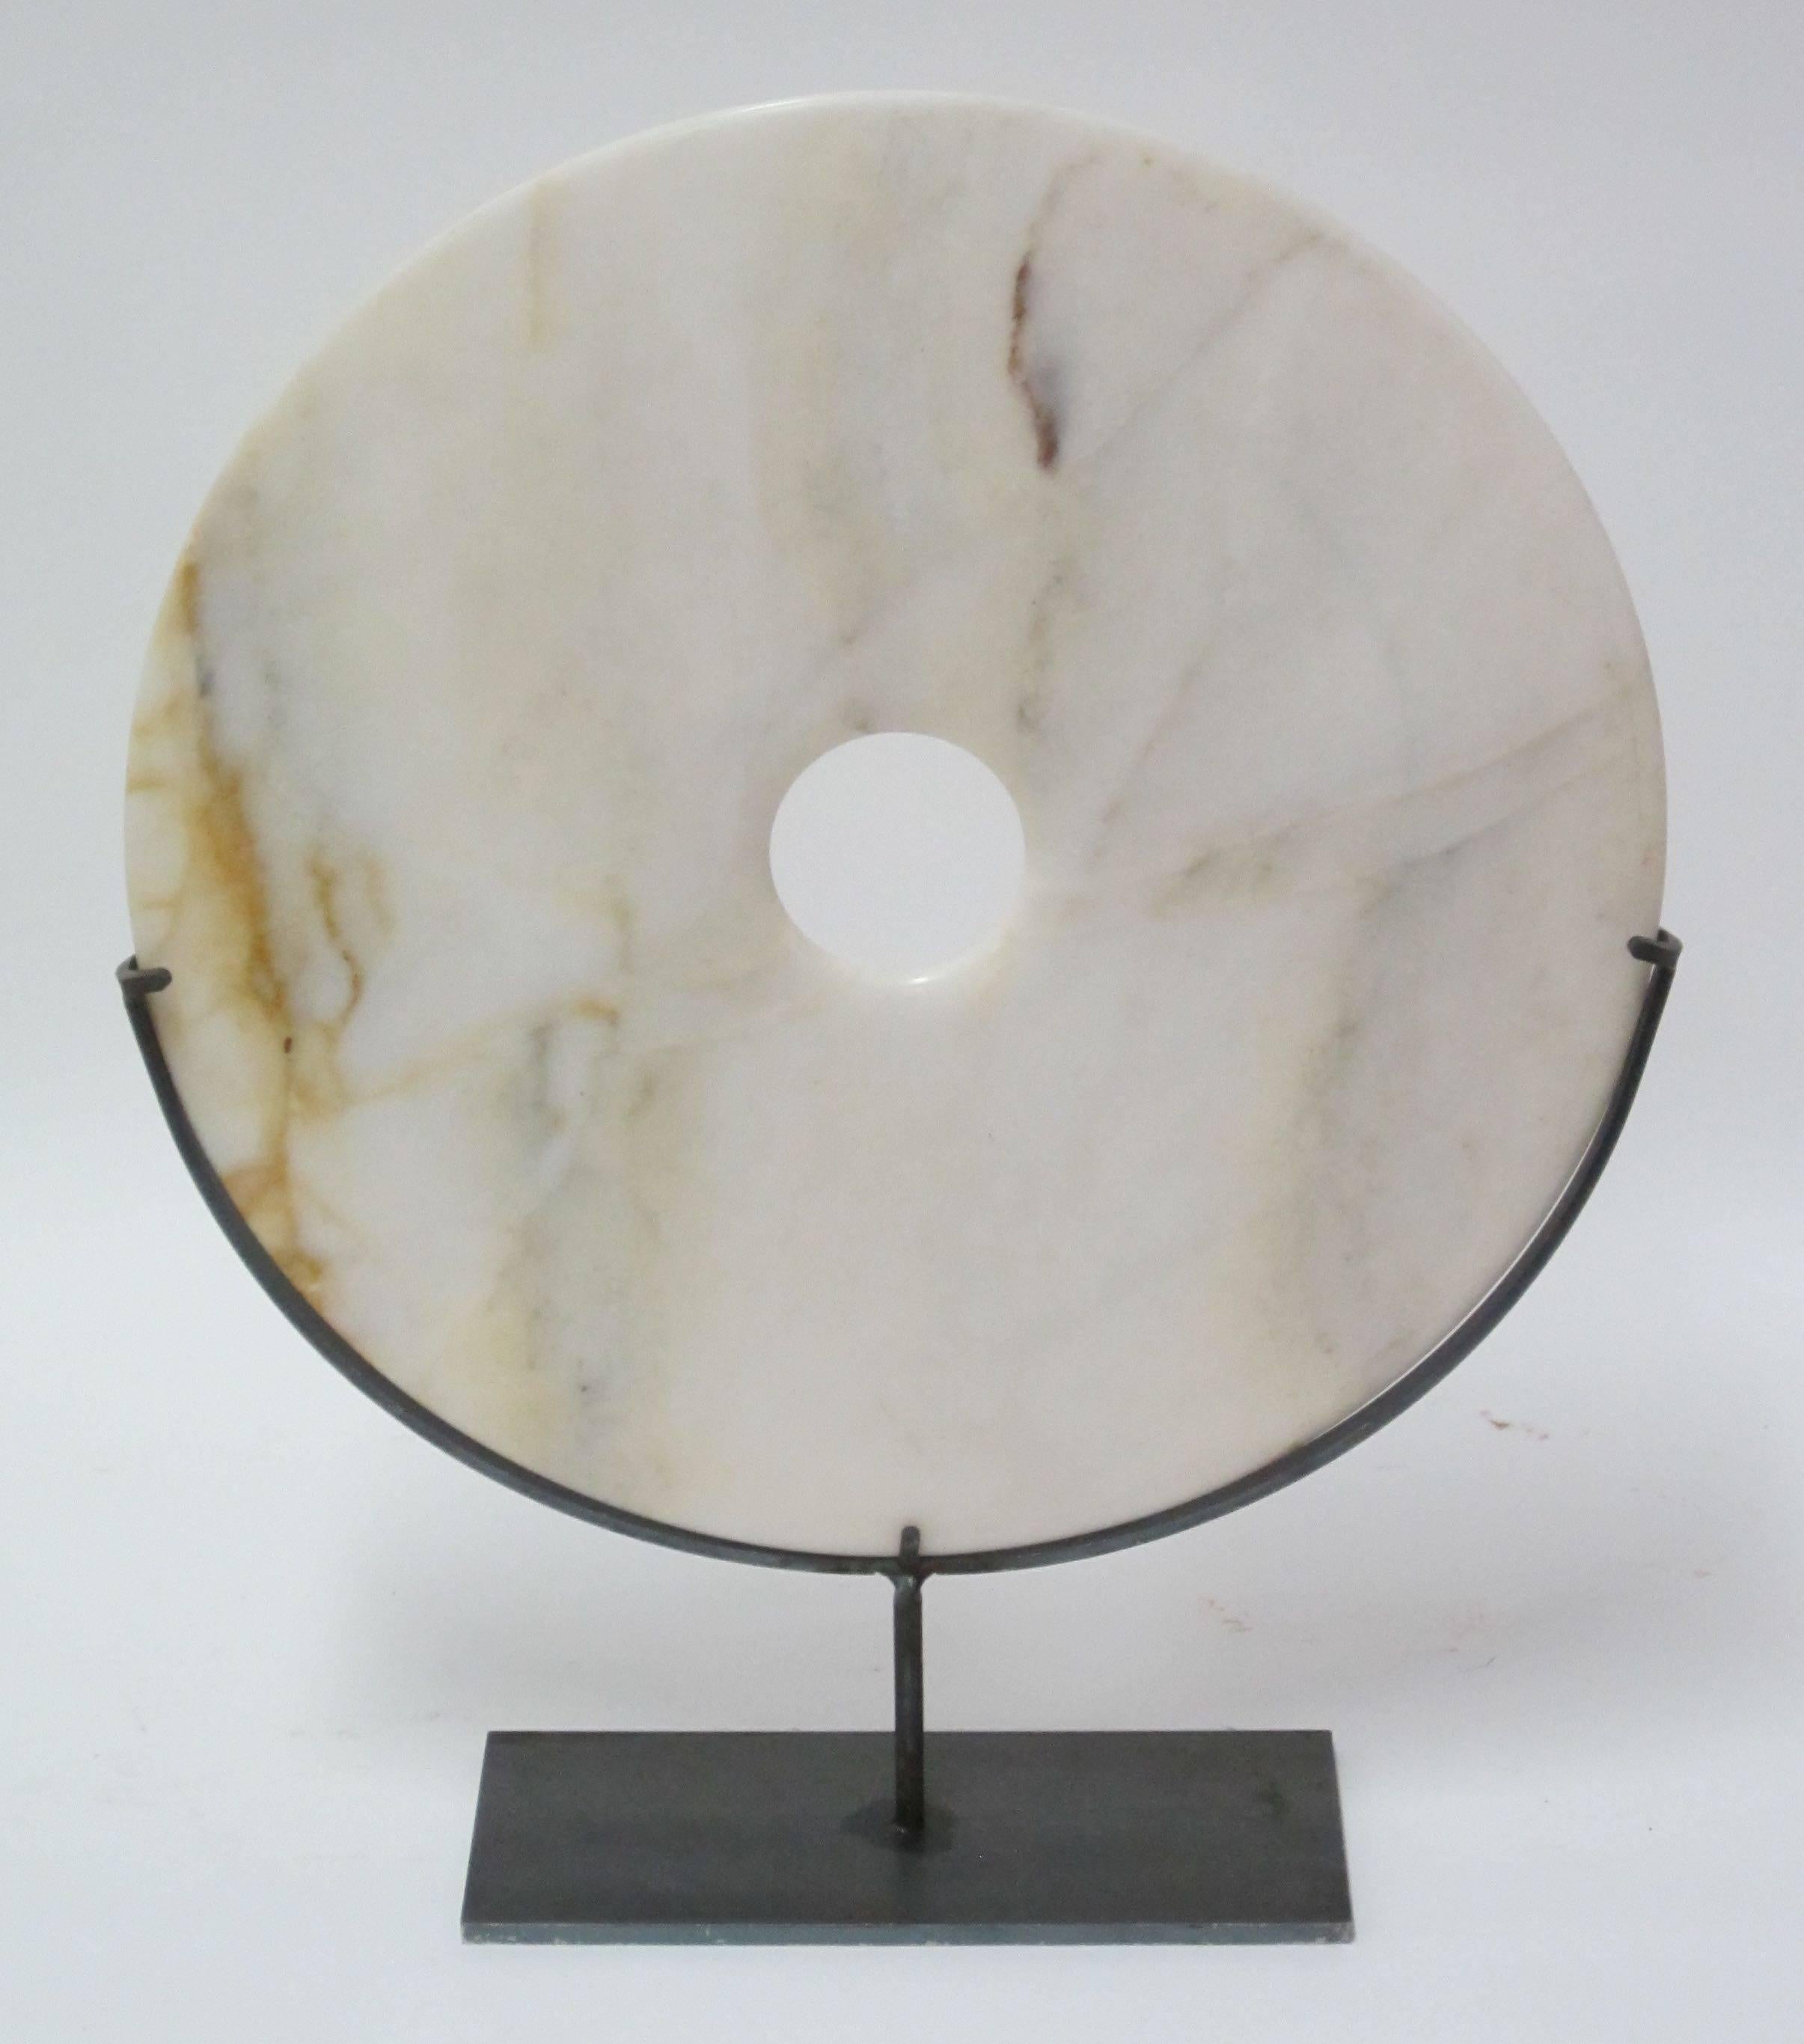 Contemporary Chinese smooth disc sculpture on metal stand.
Disc is cream with brown streaks.

